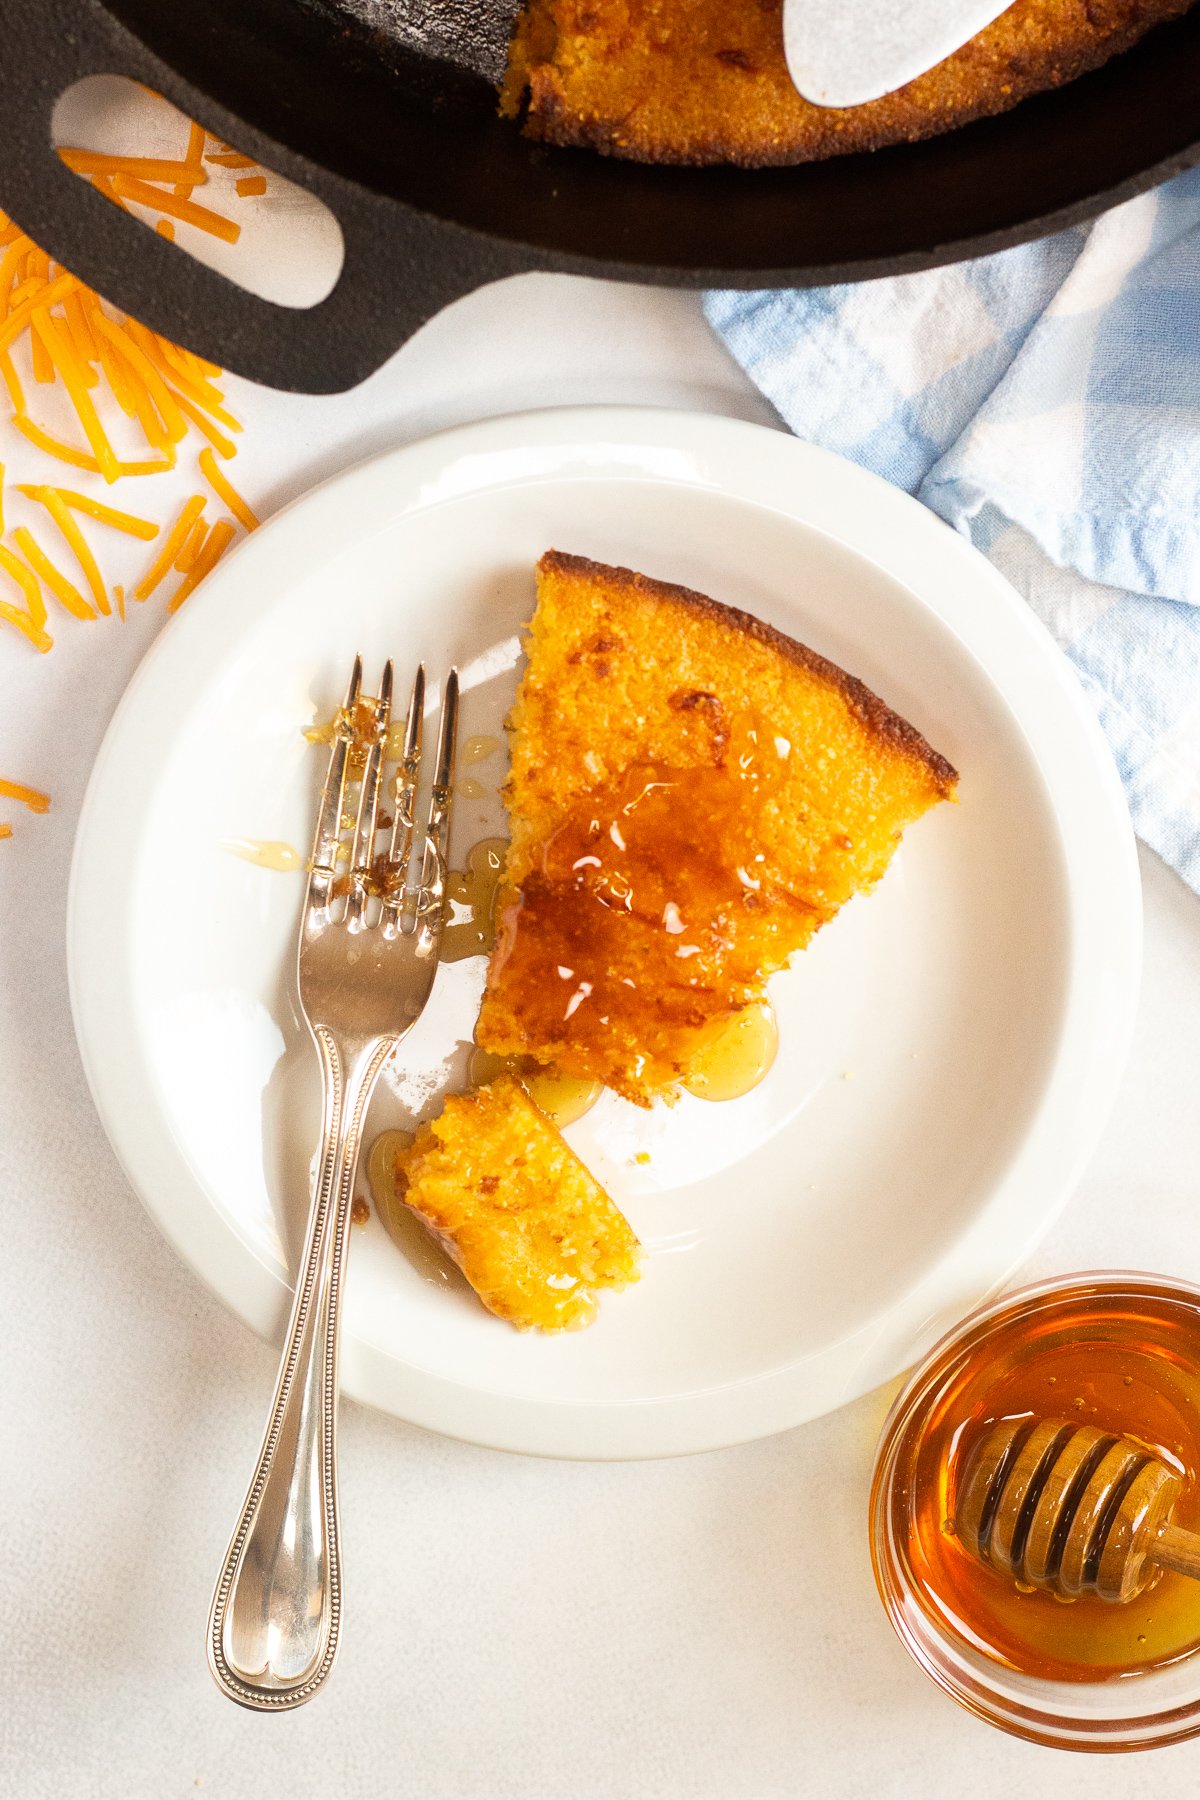 Slice of cornbread drizzled with honey on a plate.